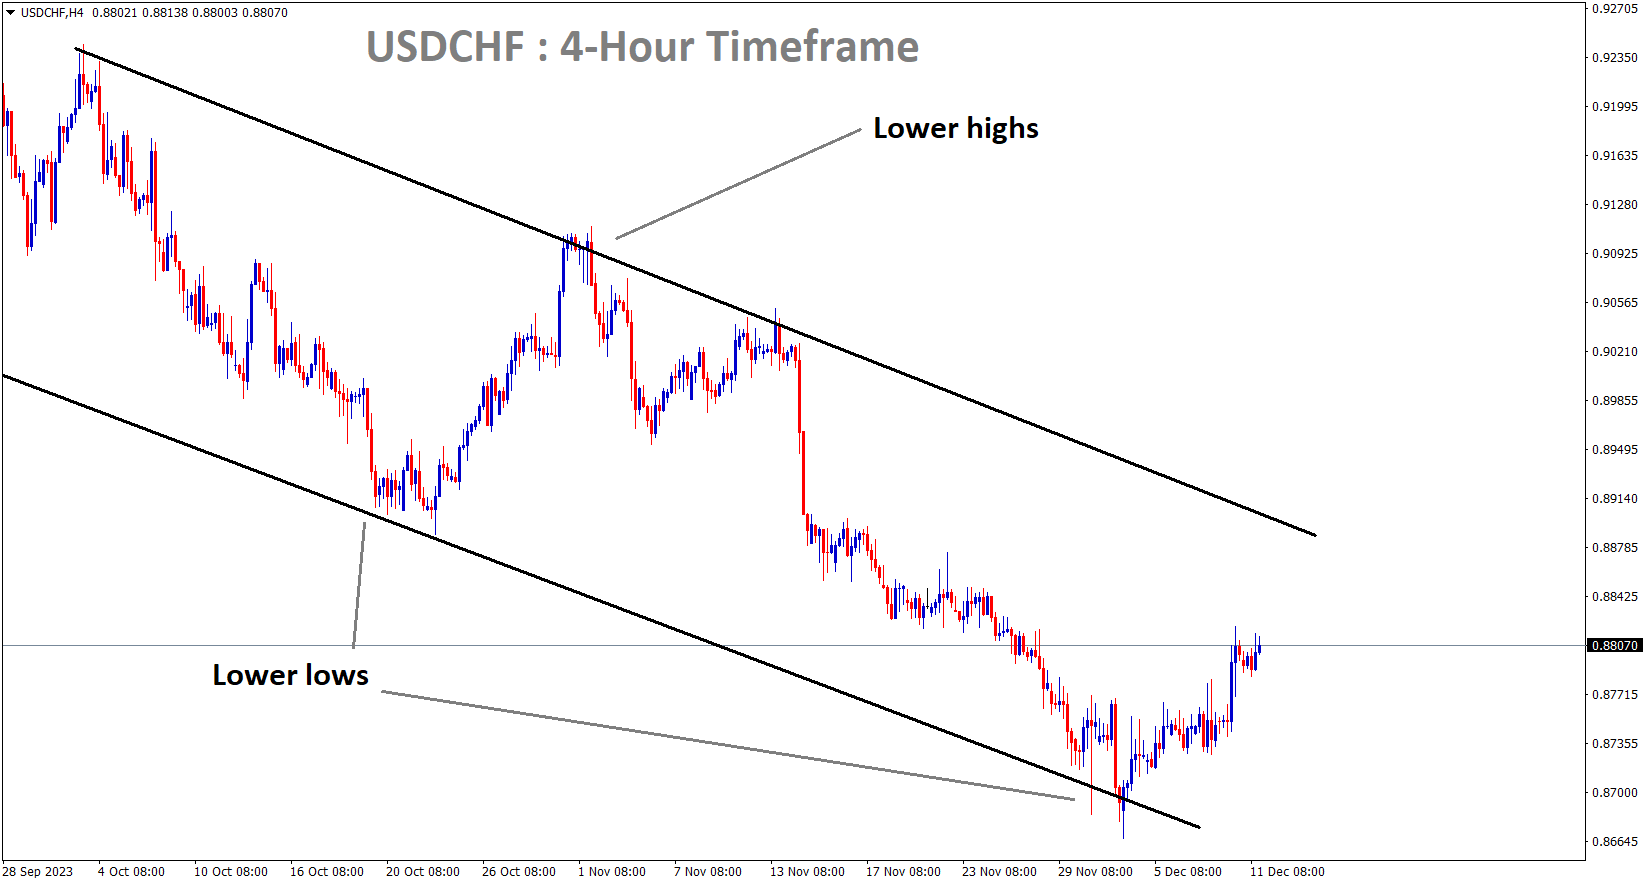 USDCHF moving in a descending channel and the market has rebounded from the lower lows area of the channel